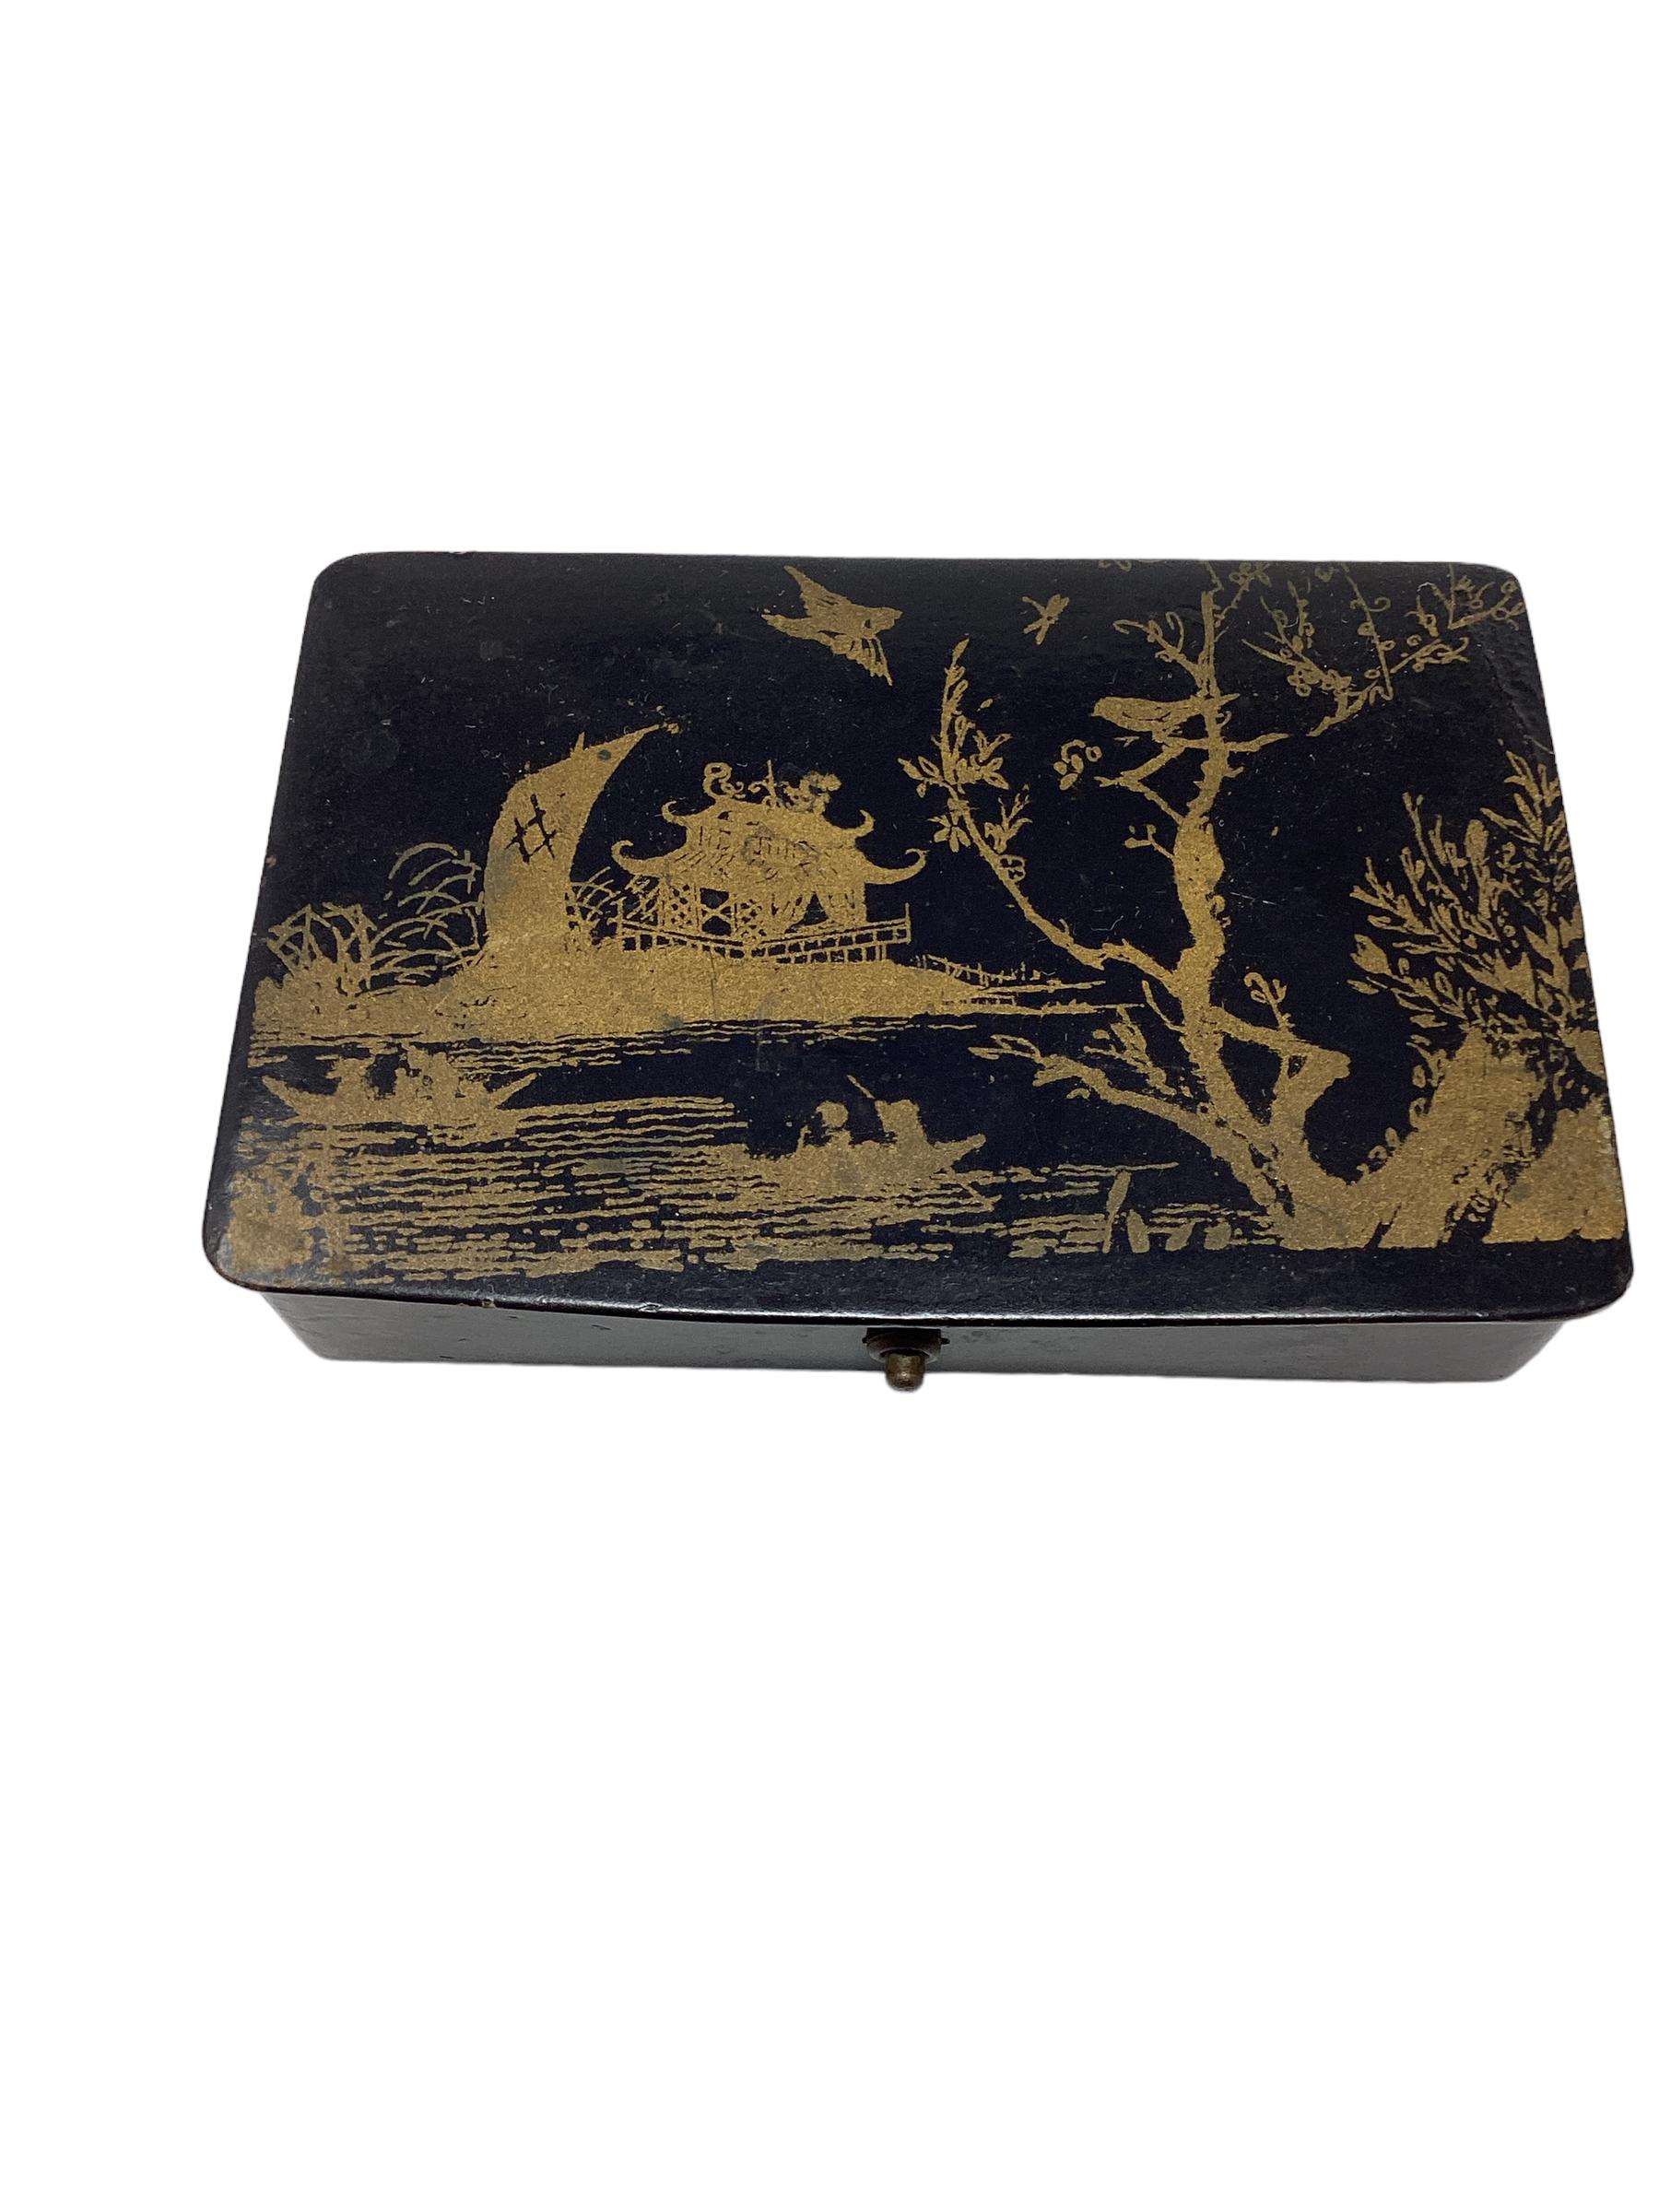 Vintage French Chinoiserie Lacquer Box, with gold decoration. This type of box would have held cigarettes or trinkets. Stamped 